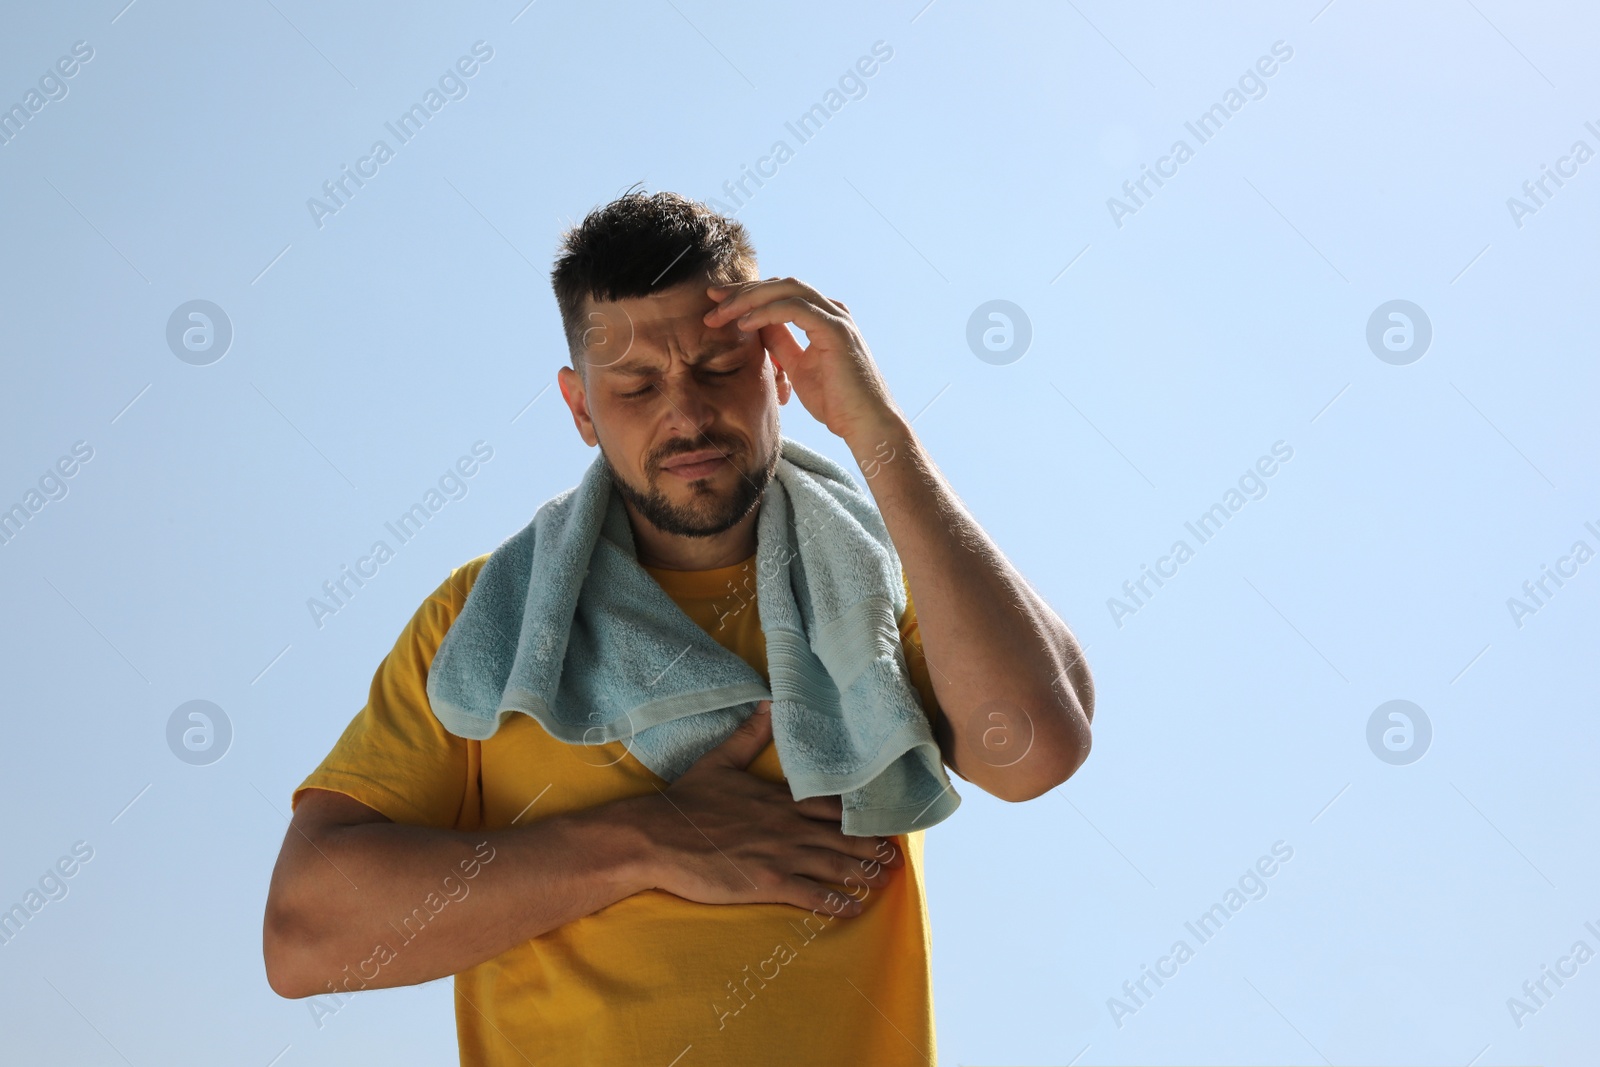 Photo of Man with towel suffering from heat stroke outdoors